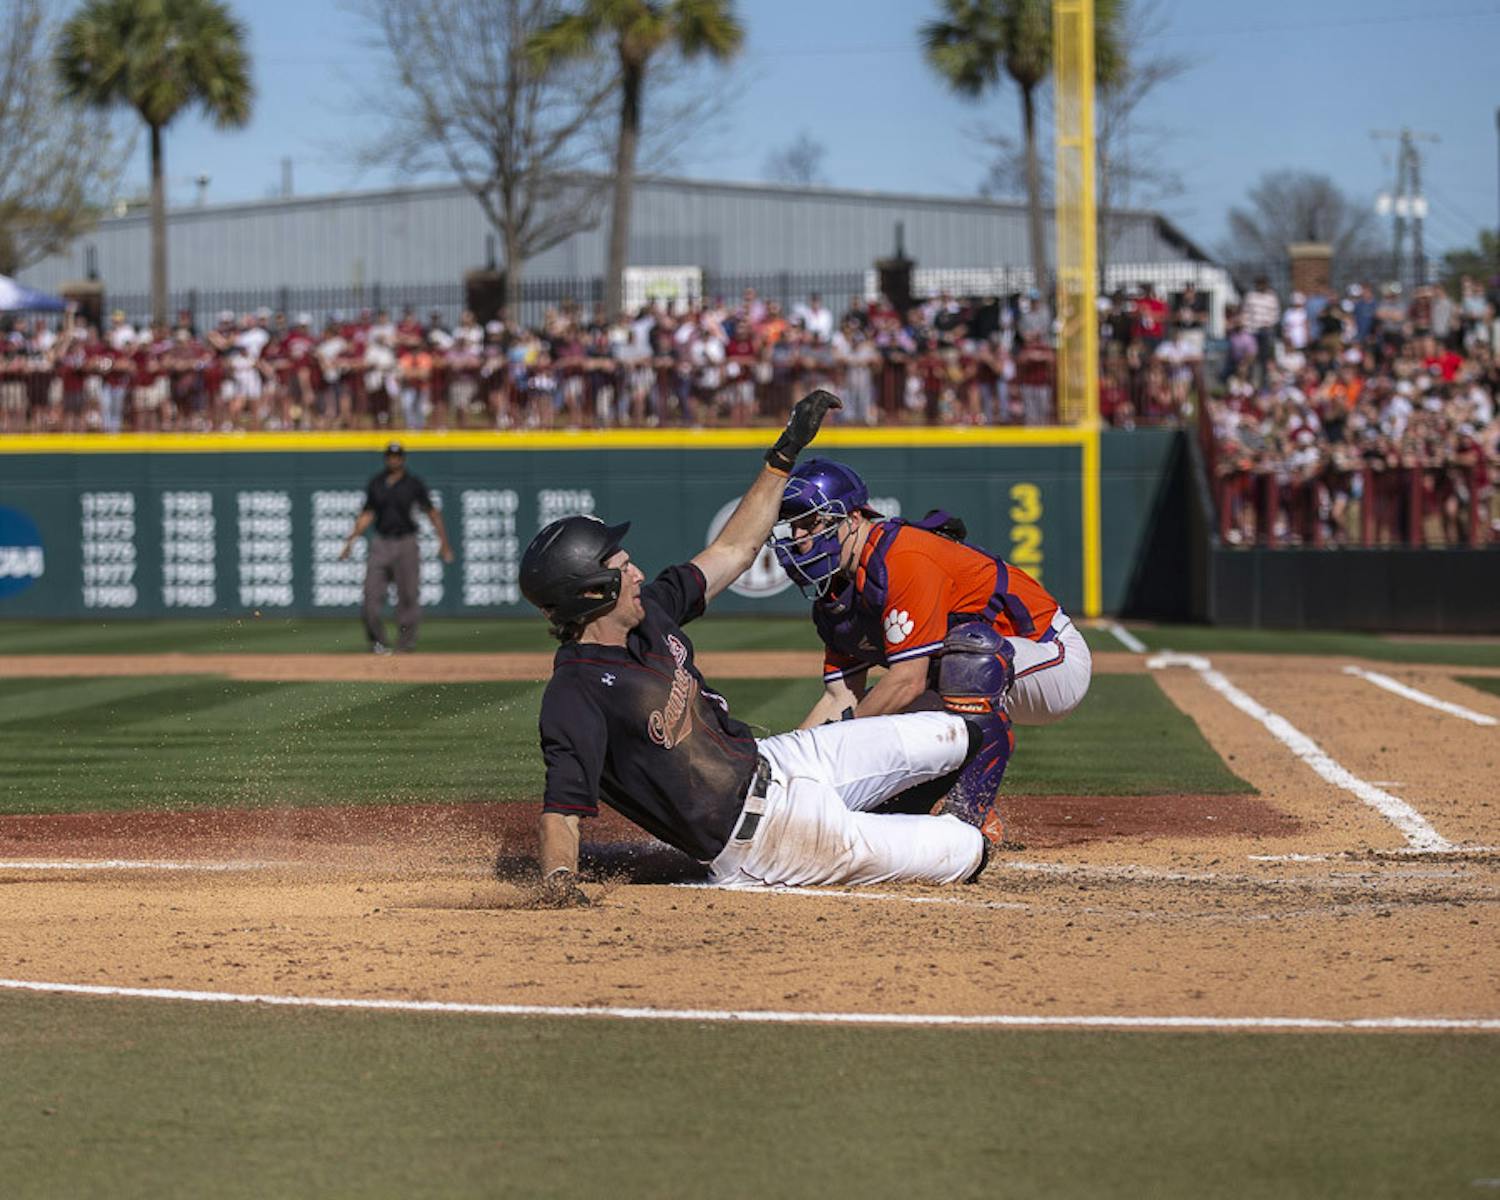 USC draws first blood, blanks rival Clemson 6-0